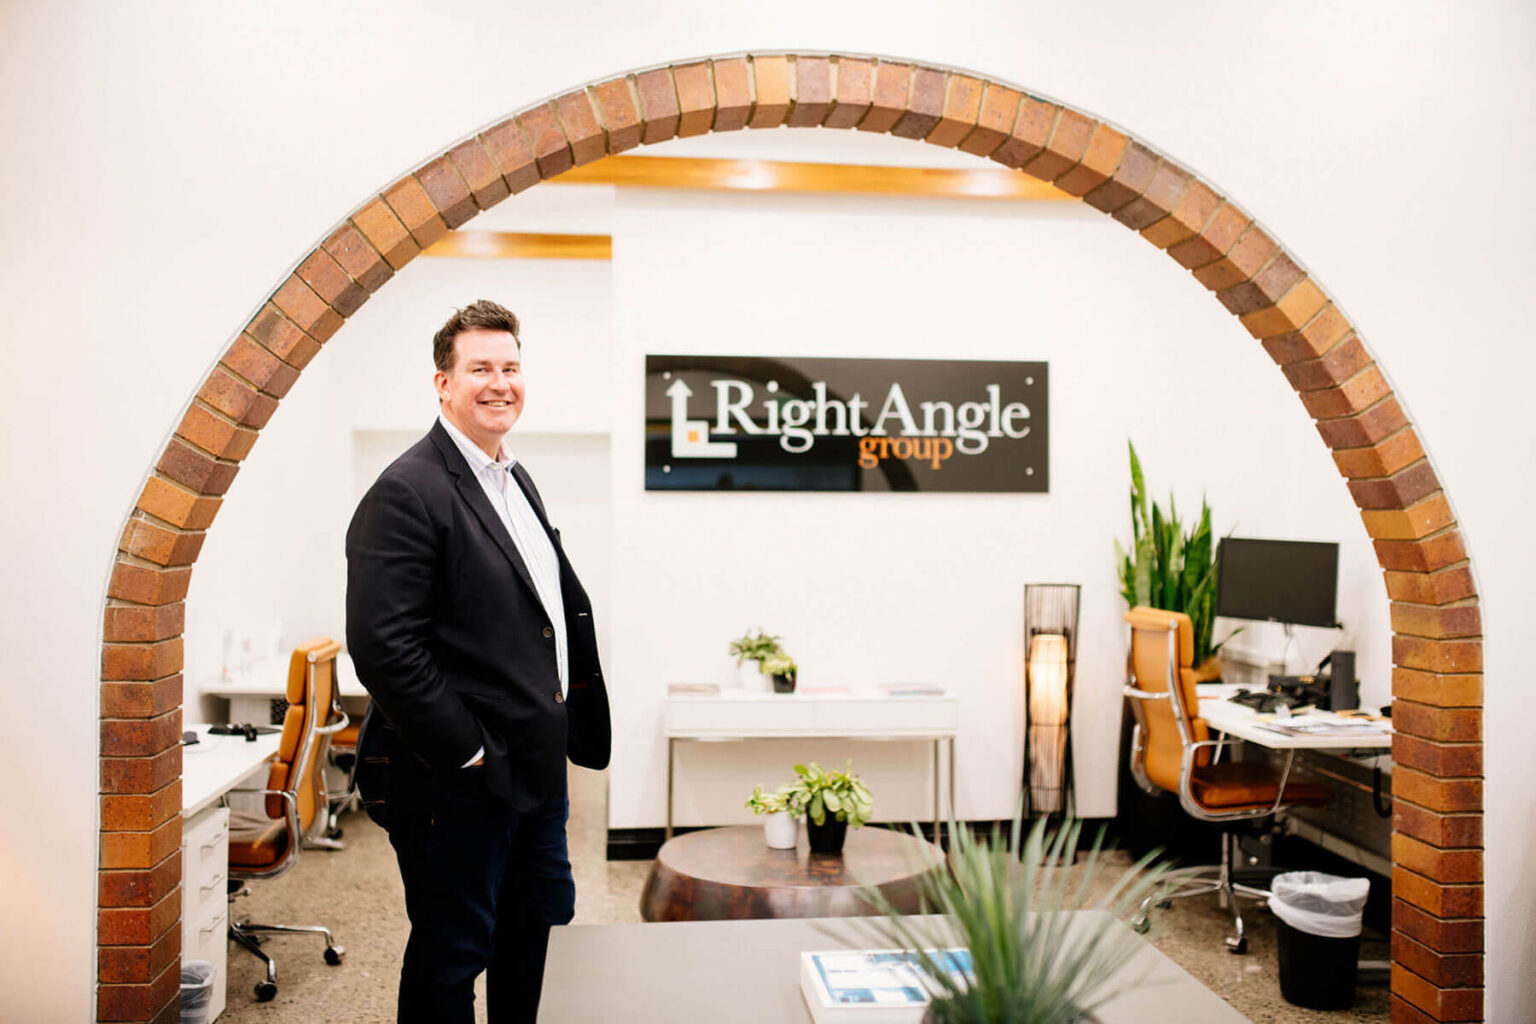 Mark Hayes, Director, standing in the Right Angle Group office